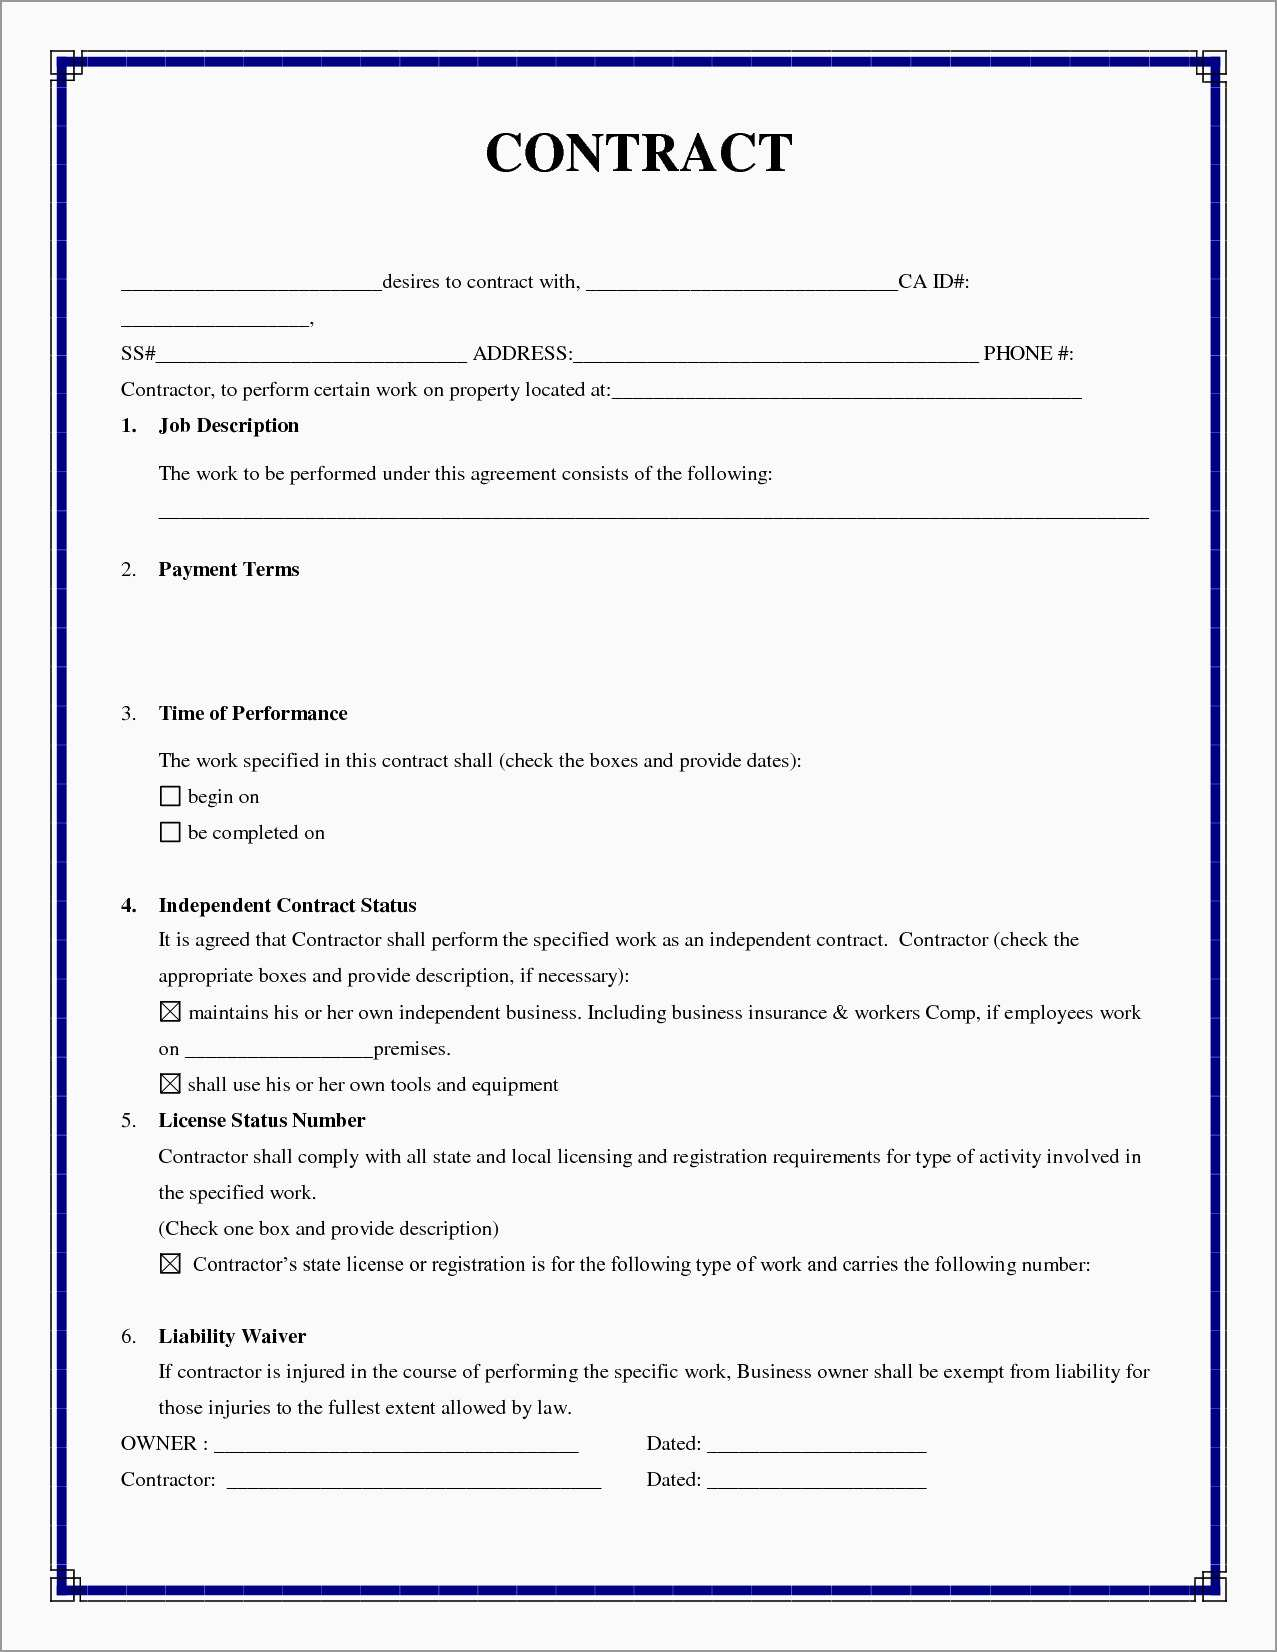 Free Construction Contract Agreement Template Free Contractor Contract Template Wonderfully 52 Contract Agreement